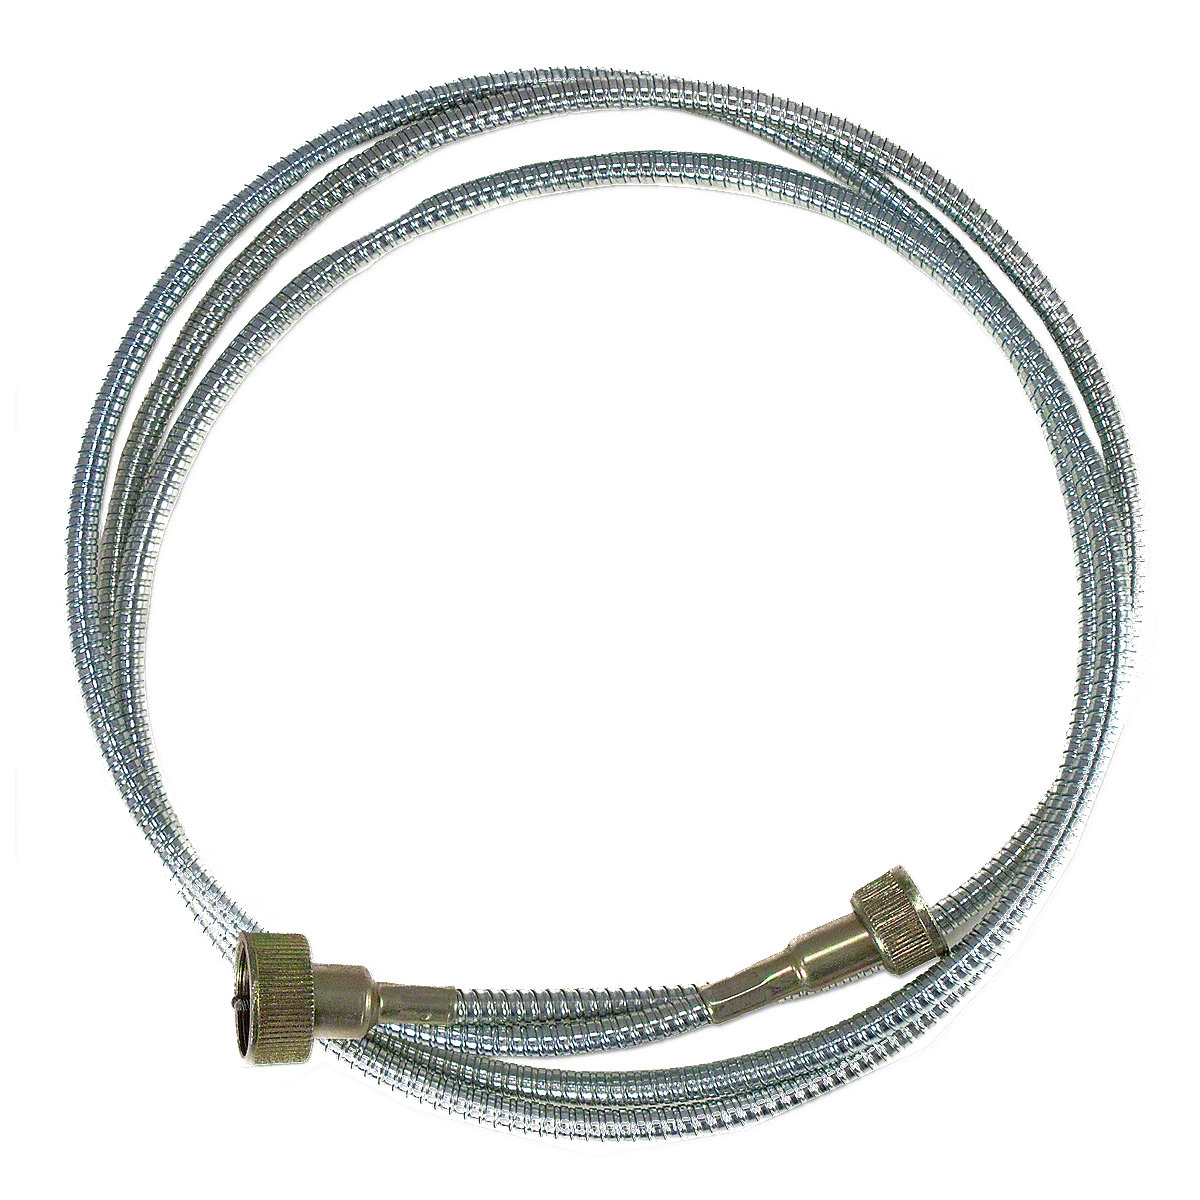 This is a new replacement Tachometer cable for the following models: Super 77, Super 88, Super 99, \1550, 1555, 1600, 1650, 1655, 1850. Gas Models\ 1750, \1800 Gas or Diesel\.\770, 880 Gas or Diesel\ 1950 Diesel Only. Replaces Oliver PN#: 104990AS. 56 inch Length
